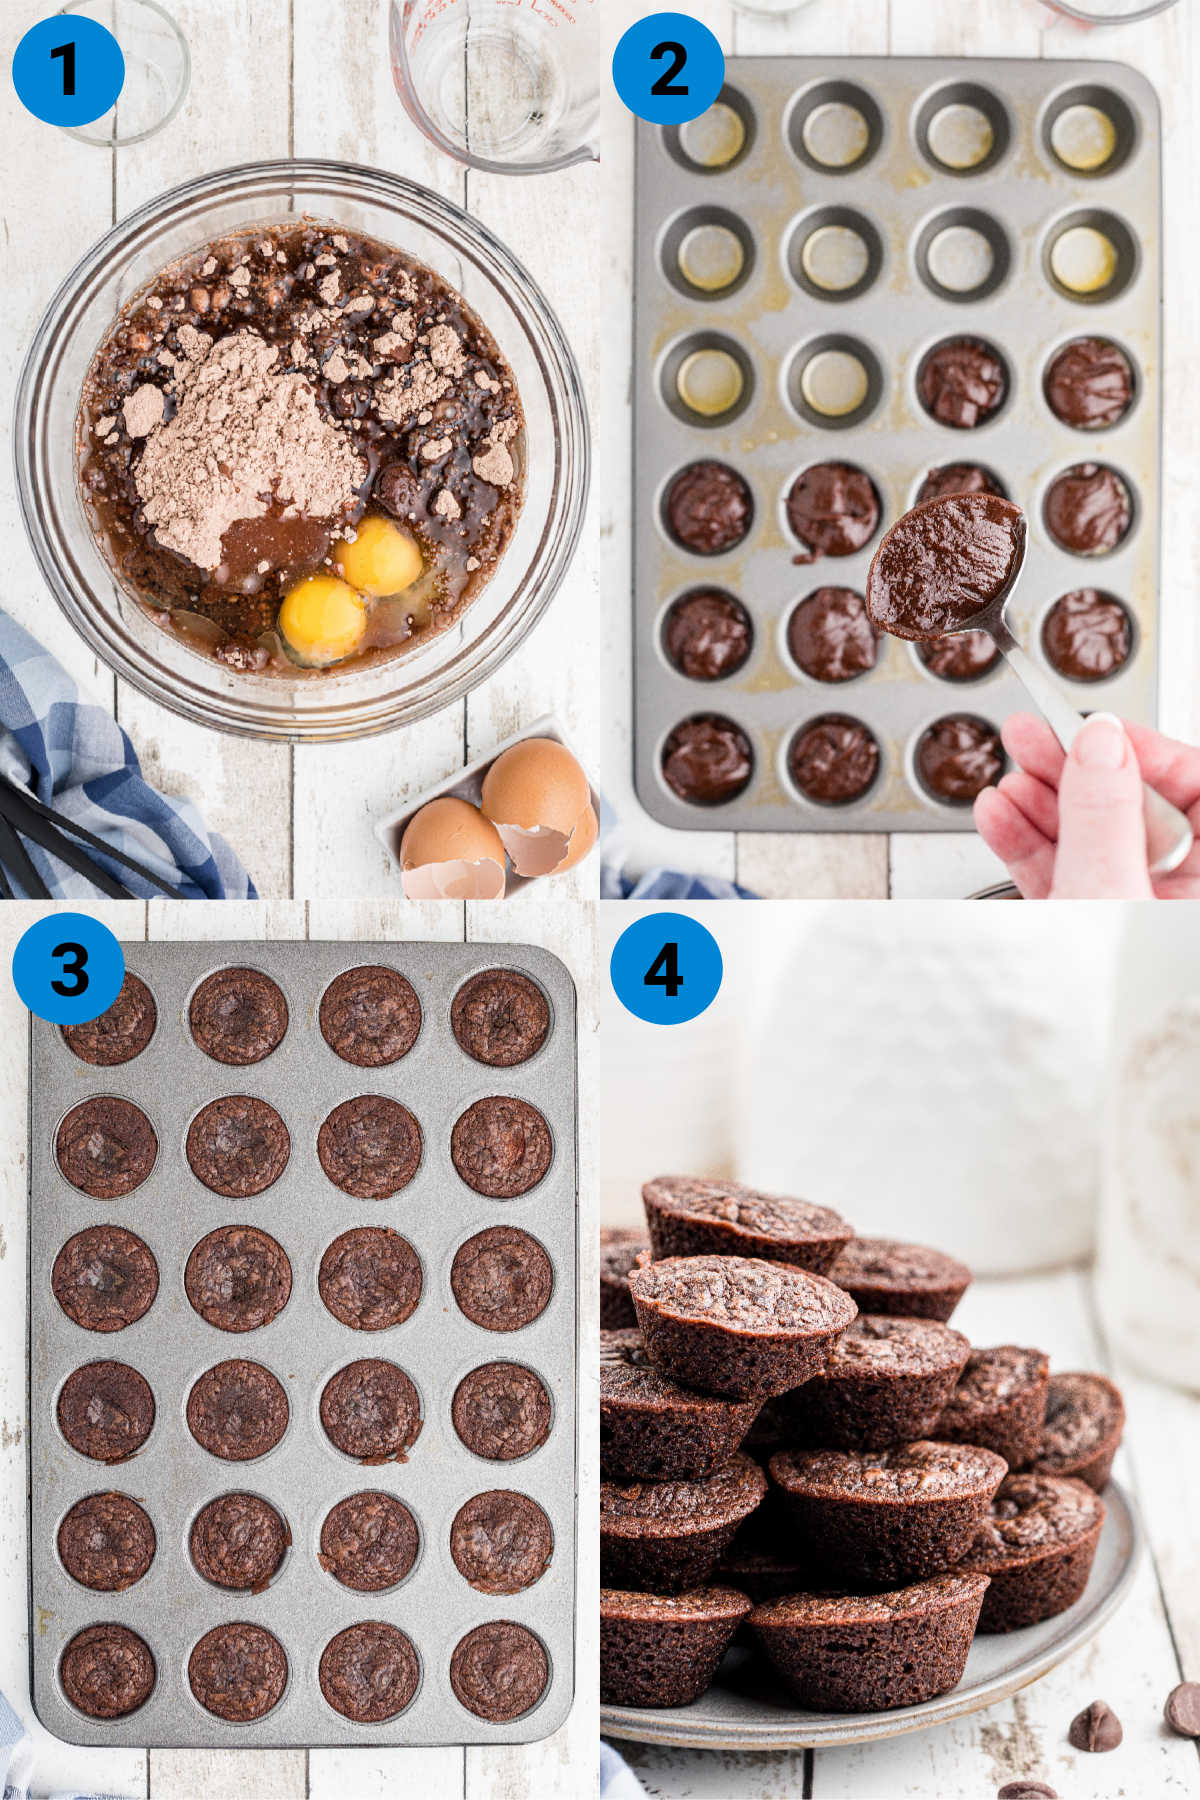 4 images showing how to make brownie bites